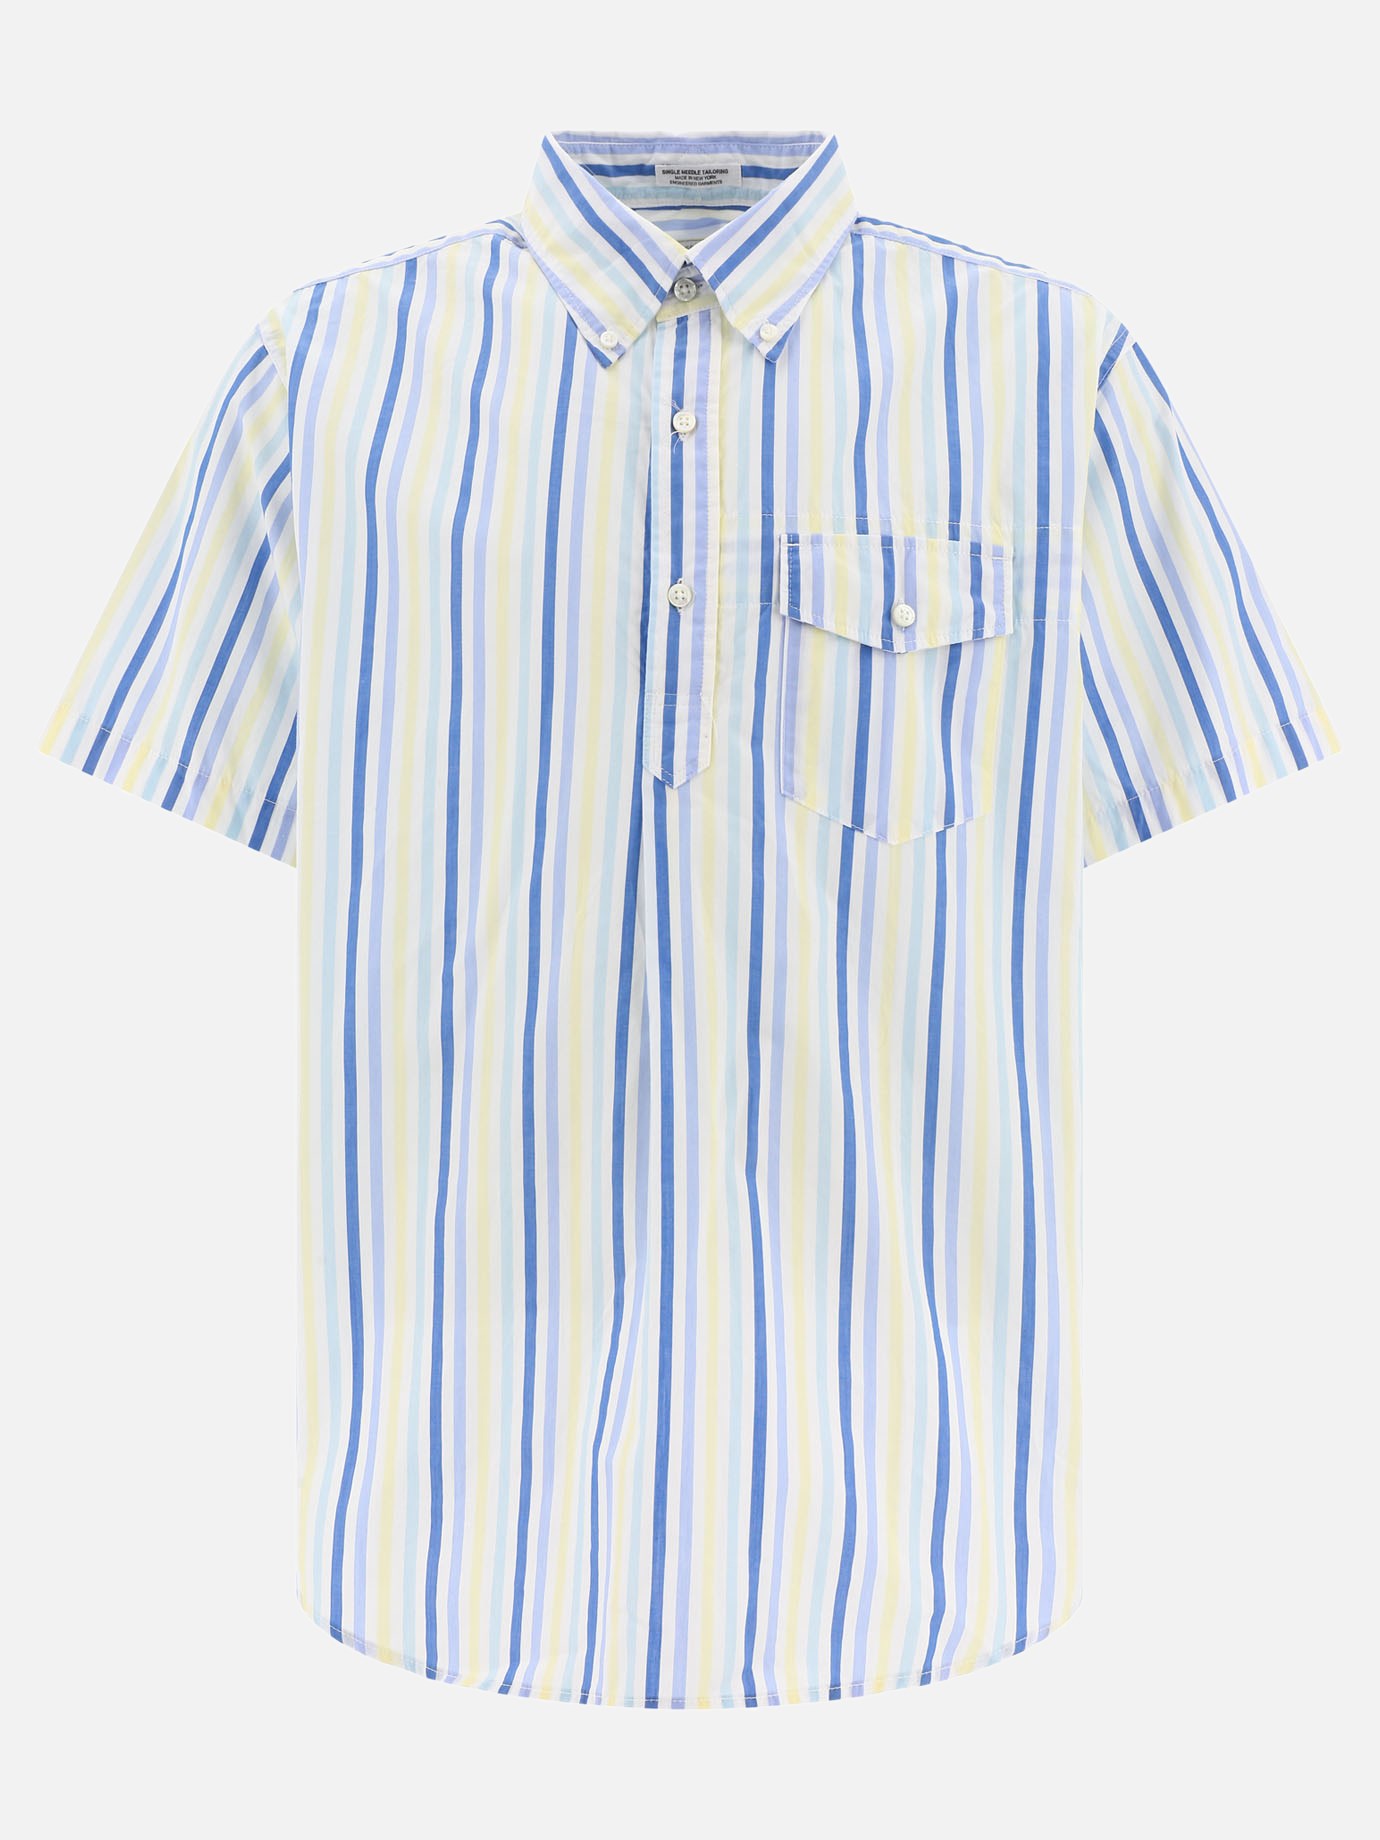  Popover  shirt by Engineered Garments